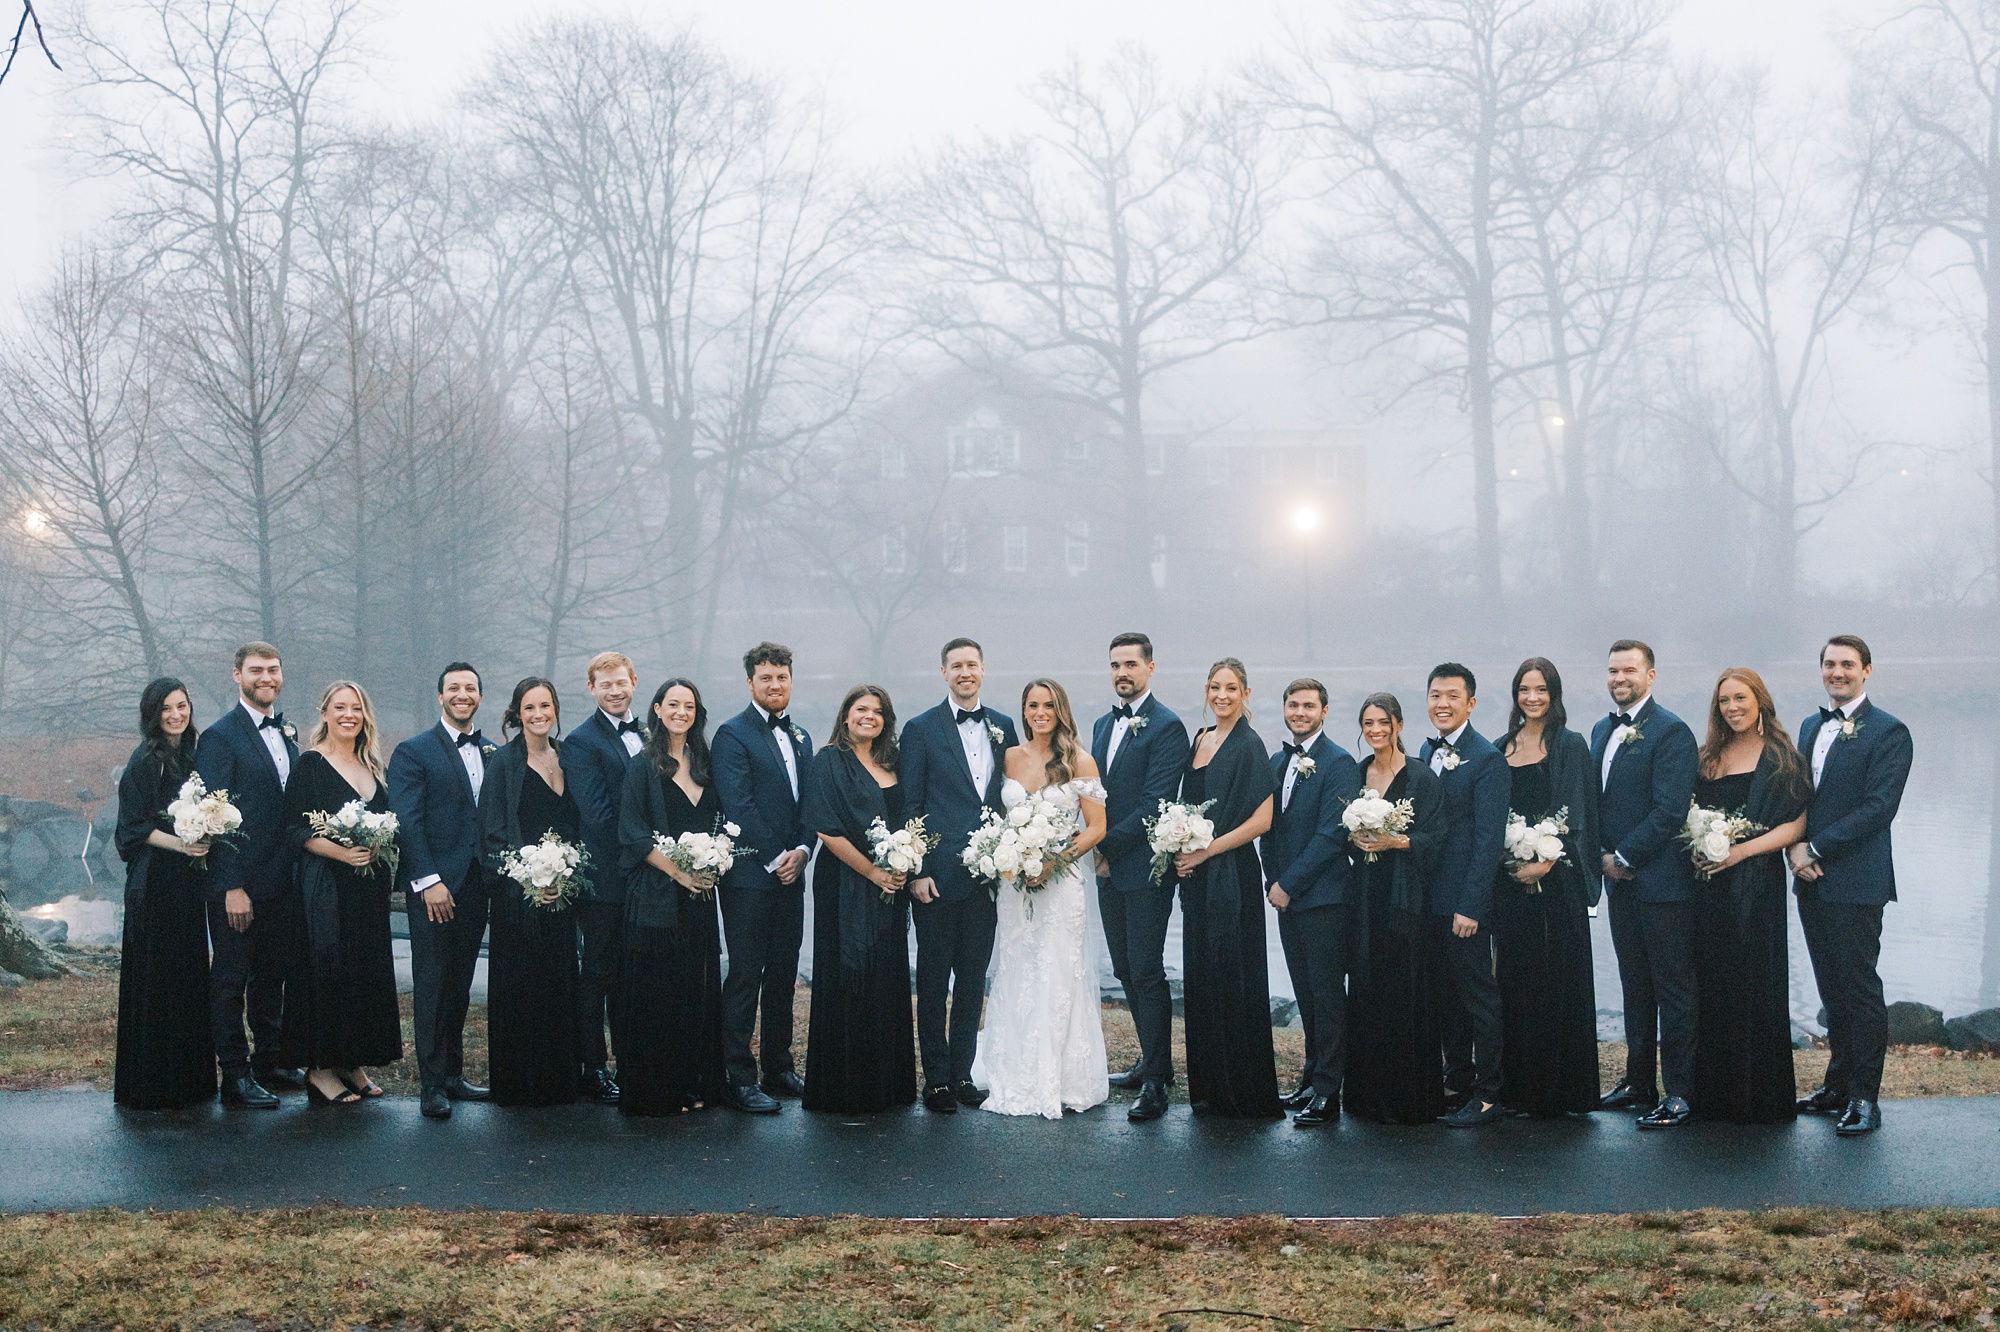 bride and groom pose with wedding party in blue and black in New Jersey park